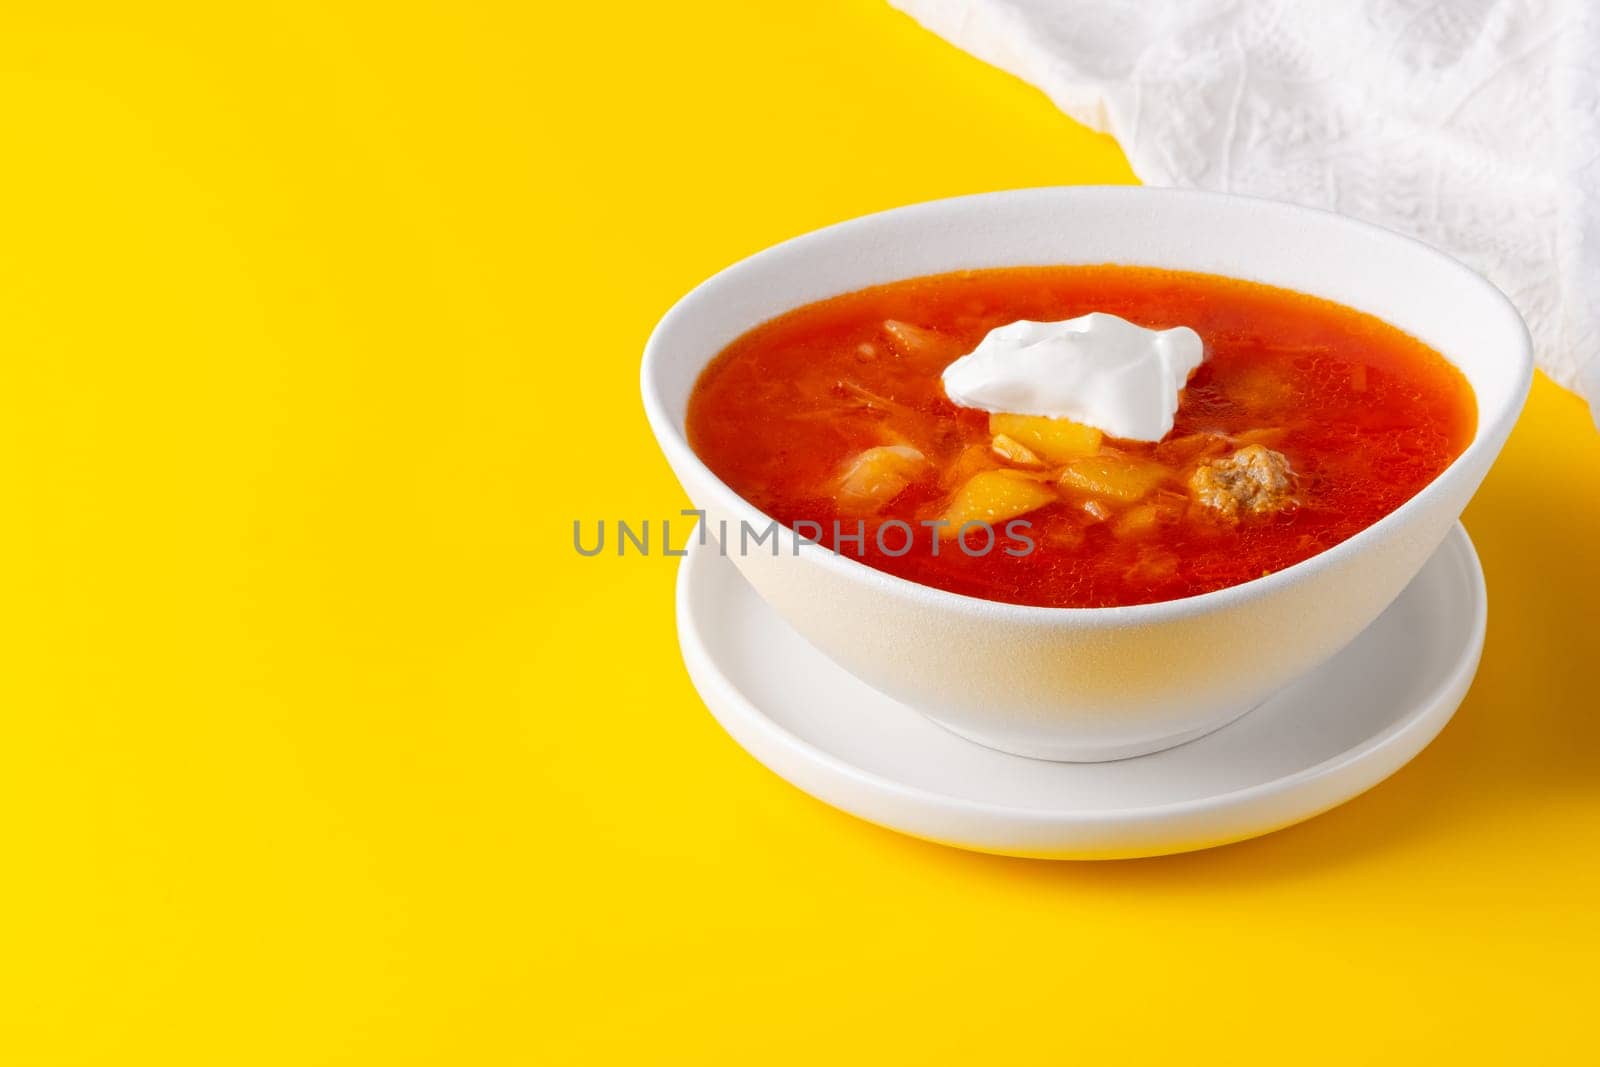 Red borscht in bowl on a yellow background, traditional dish that is cooked with broth, with copy space for text.